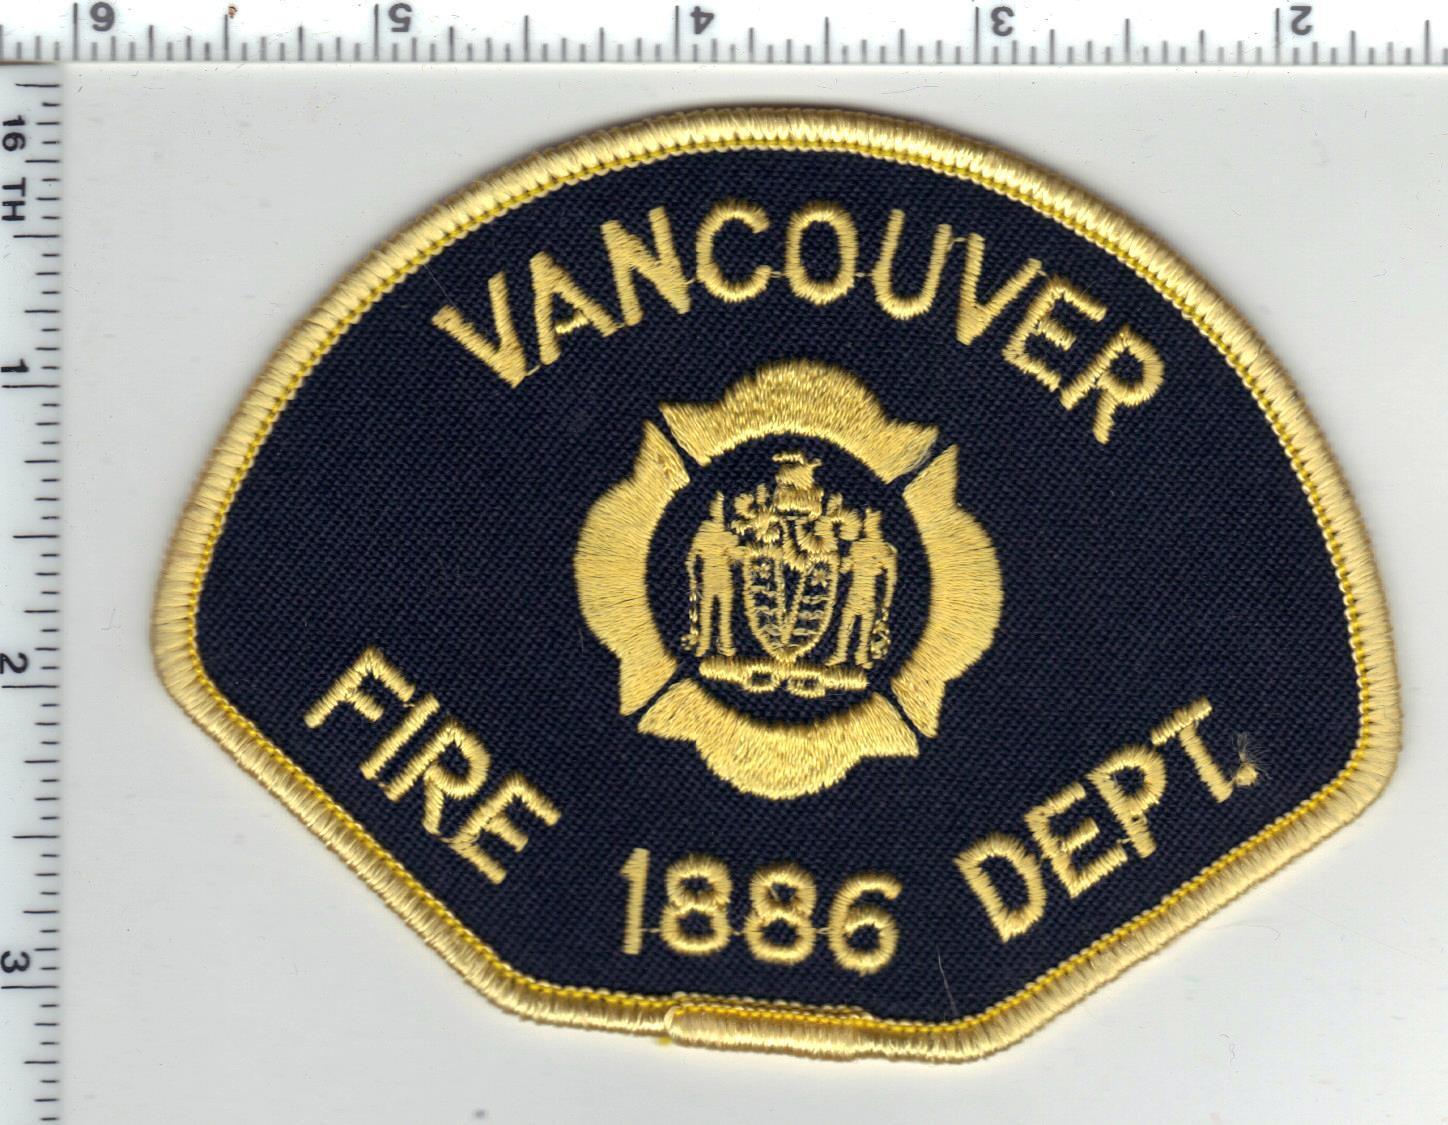 Vancouver Fire Dept (british Columbia, Canada) Yellow Shoulder Patch Late 1990's